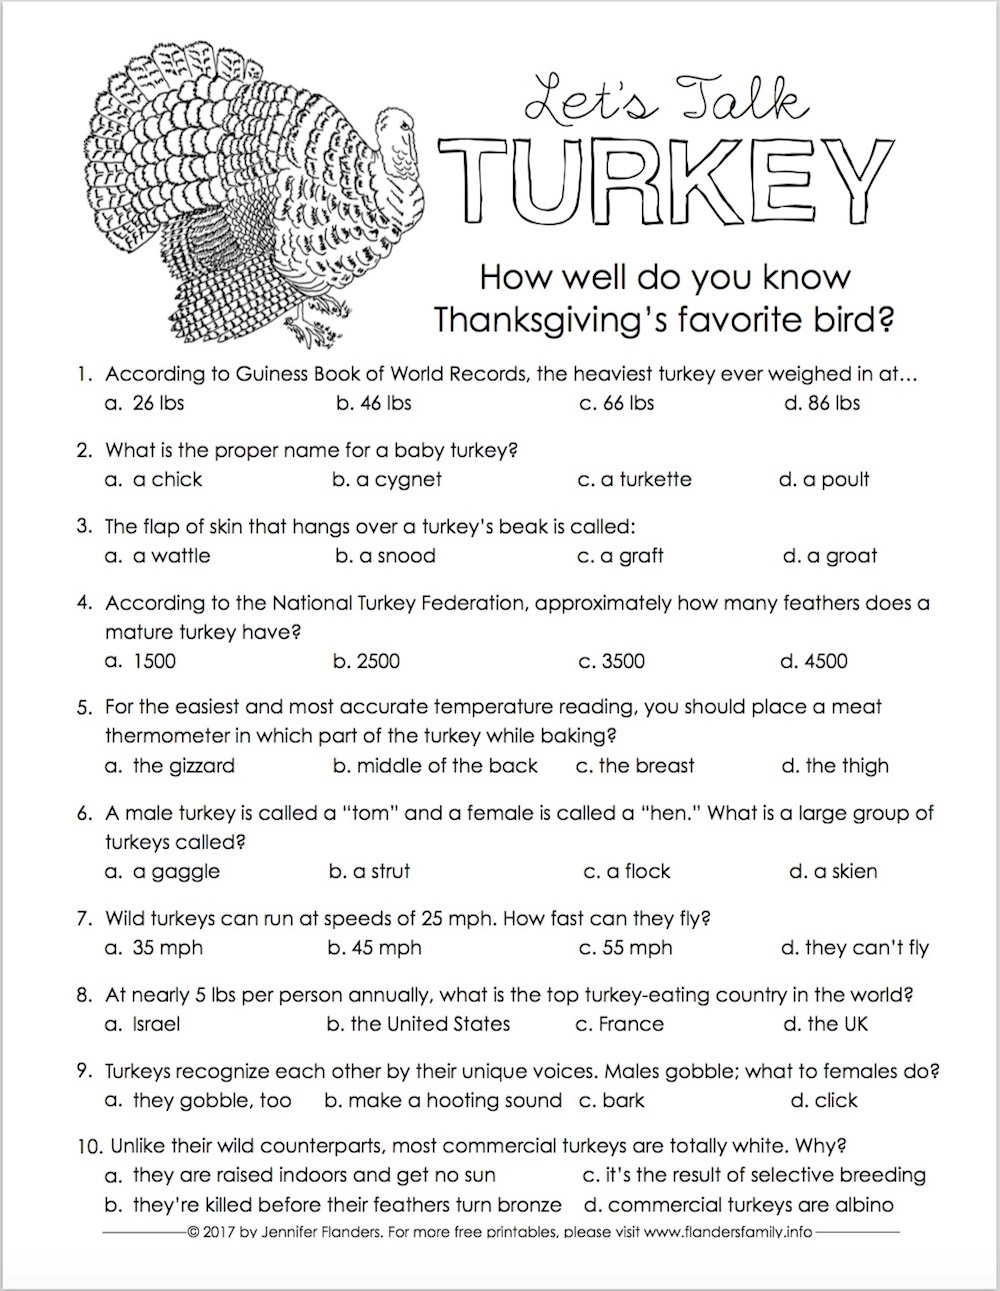 Let's Talk Turkey: Trivia Quiz For Thanksgiving - Flanders Family - Free Printable Trivia Questions And Answers